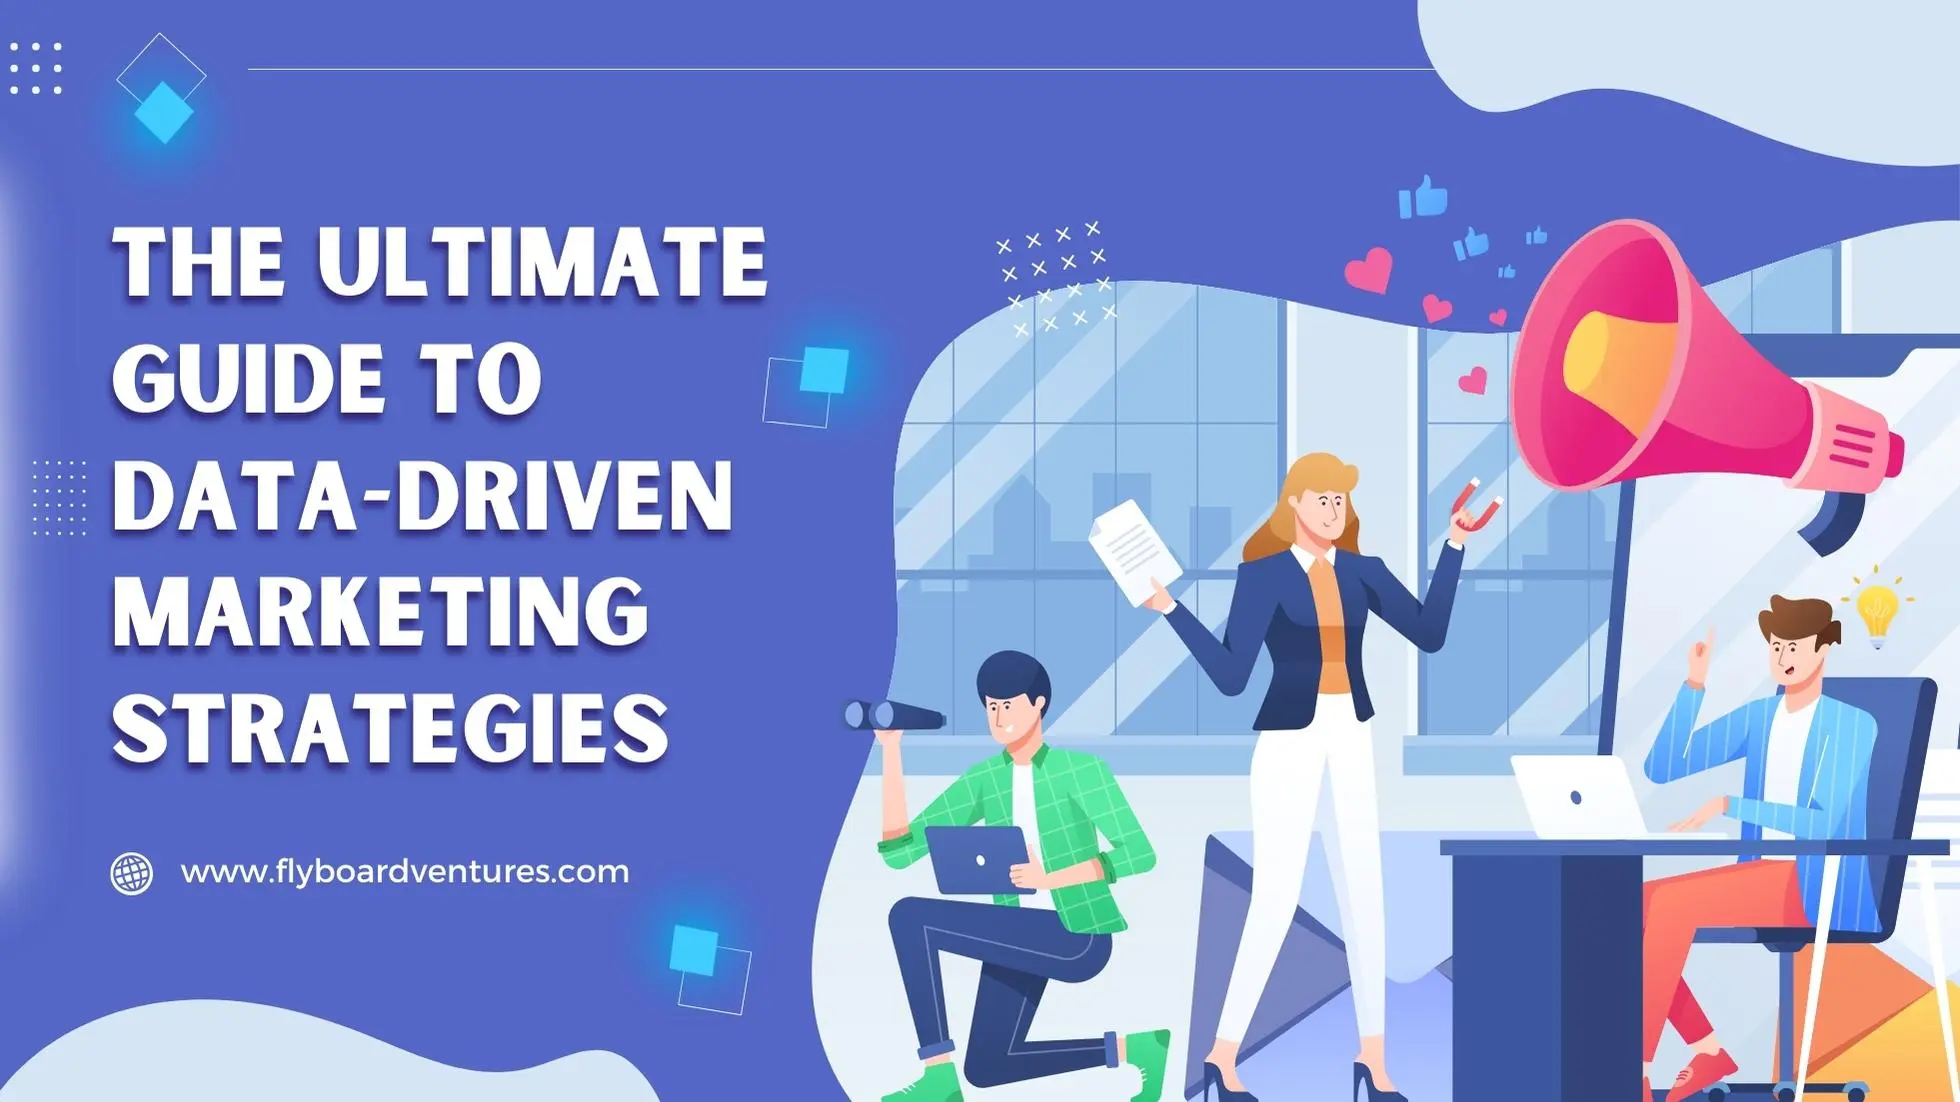 The Ultimate Guide To Data-Driven Marketing Strategies